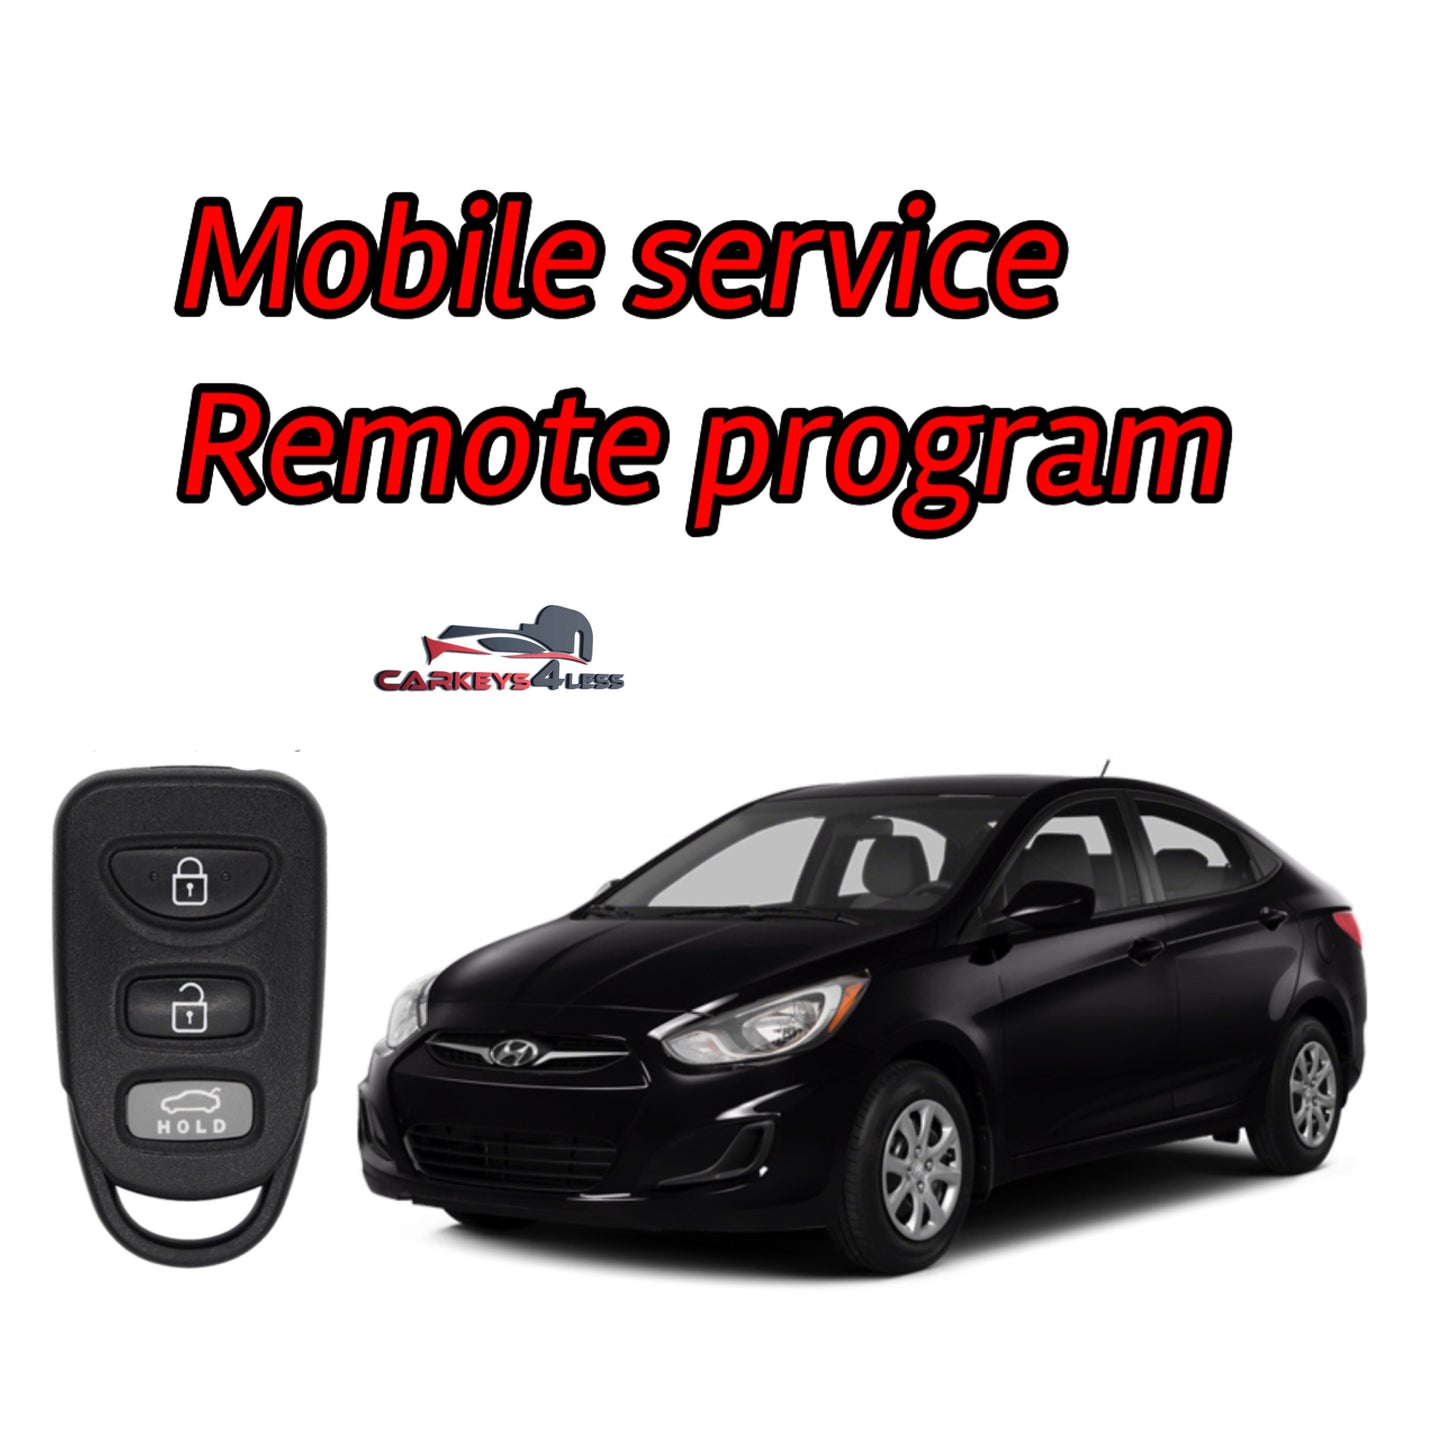 Mobile service for an aftermarket hyundai remote